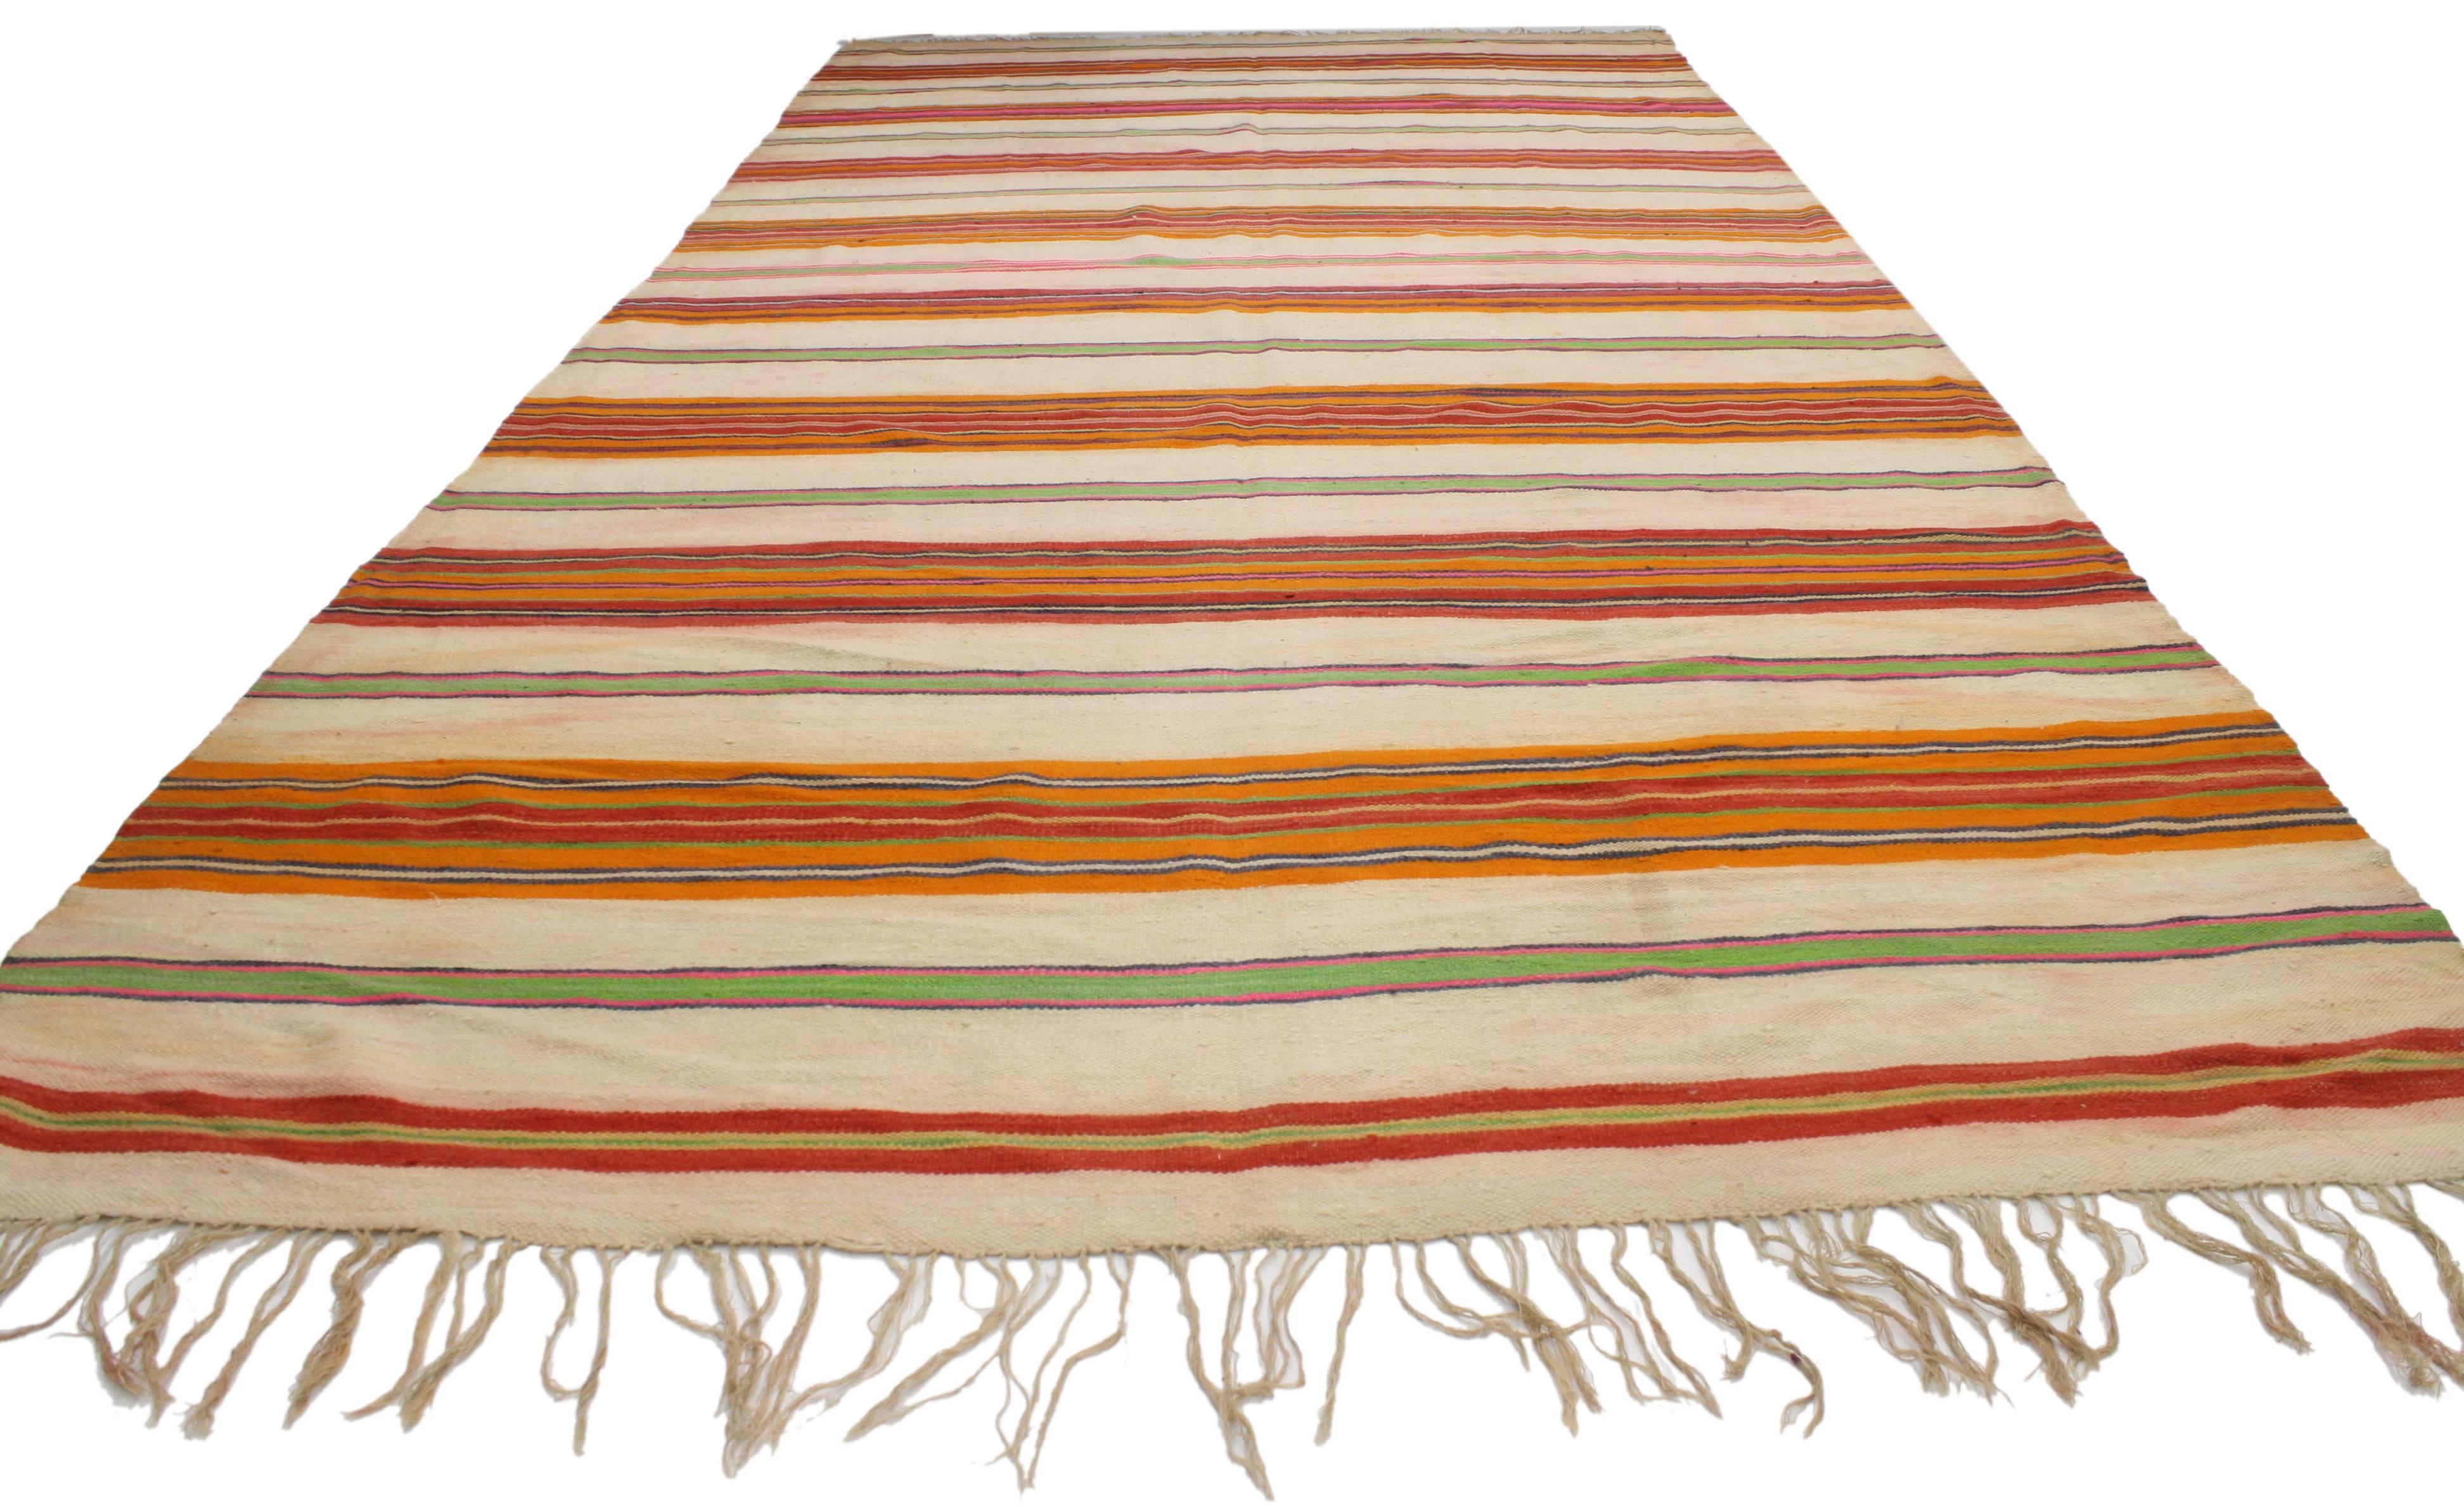 Wool Vintage Berber Moroccan Striped Kilim Rug with Tribal Boho Chic Style For Sale